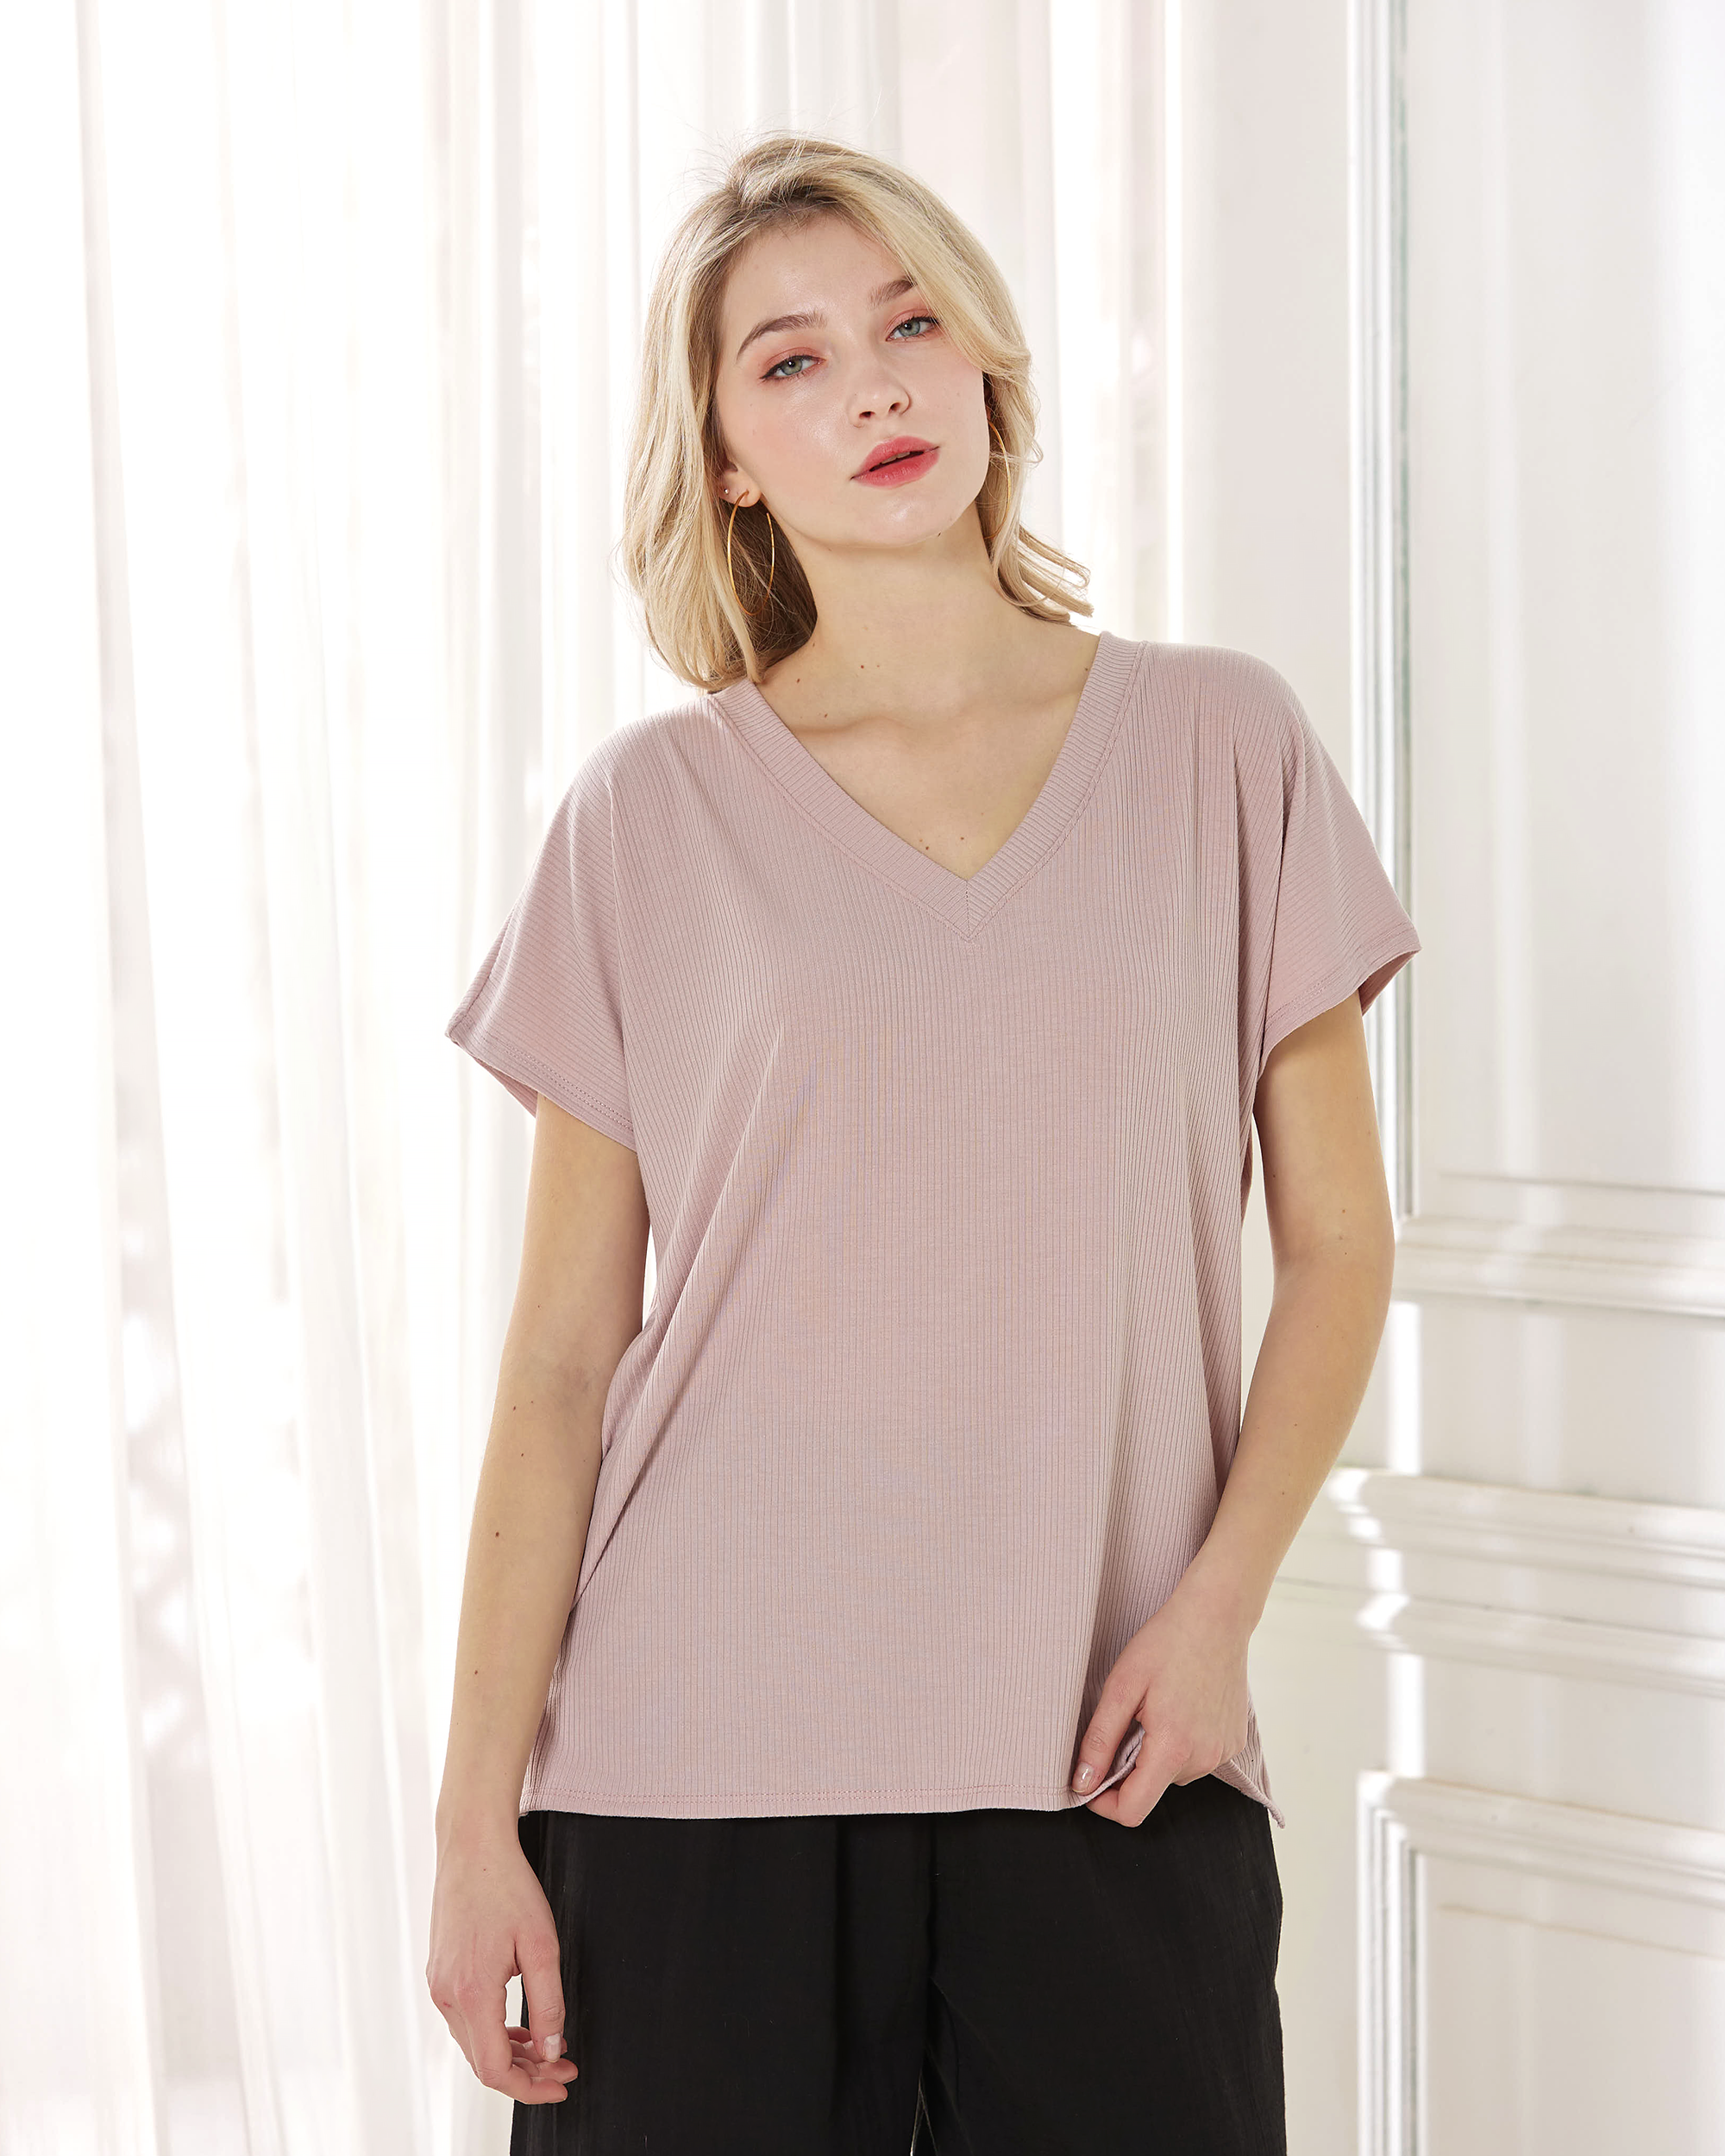 Taupe V-Neck Ribbed Knit Top - Short Sleeve